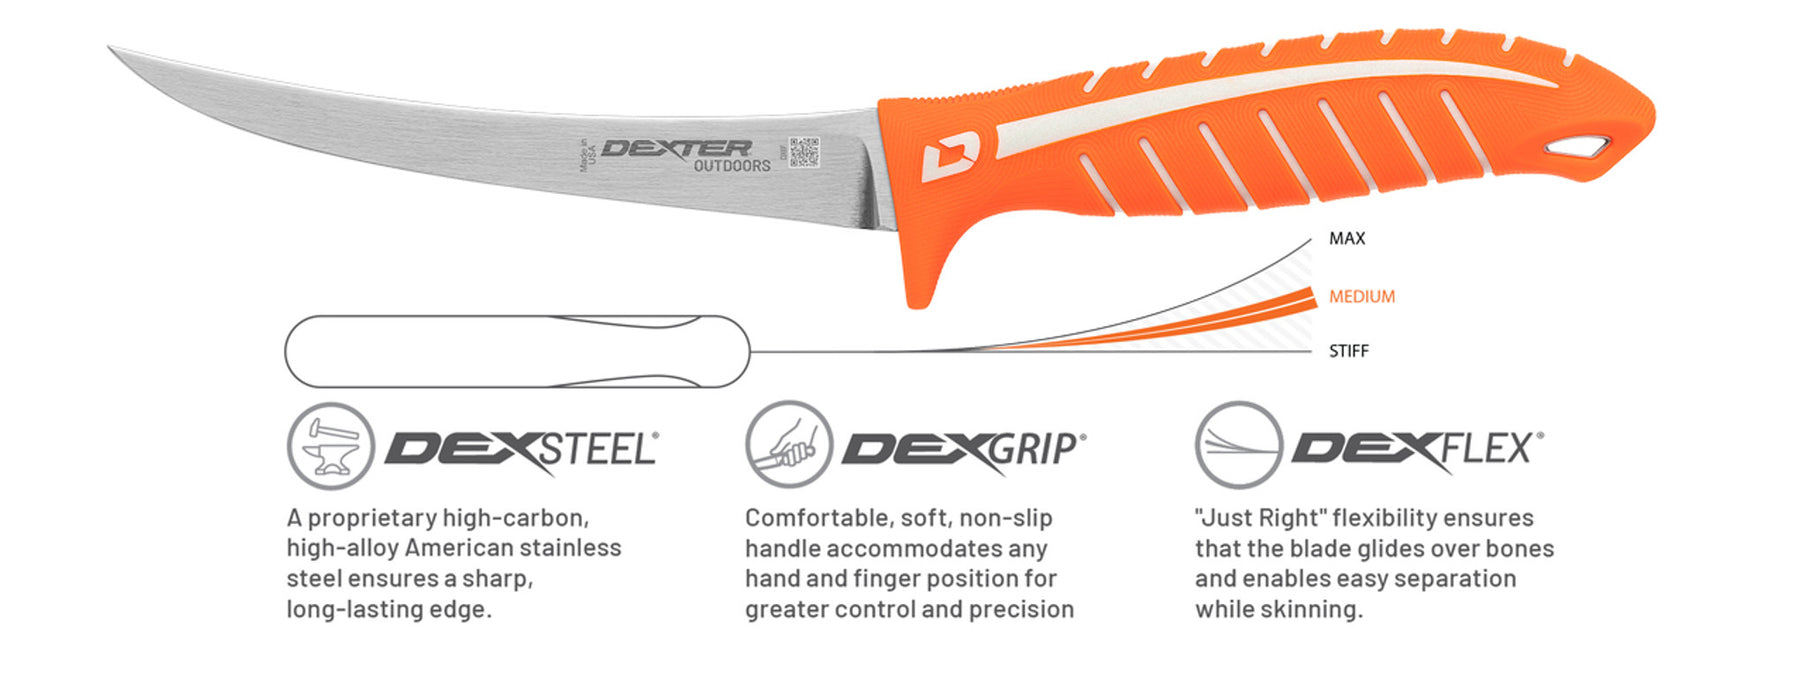 Dexter Outdoors DEXTREME 6" Flexible Fillet Knife with Sheath